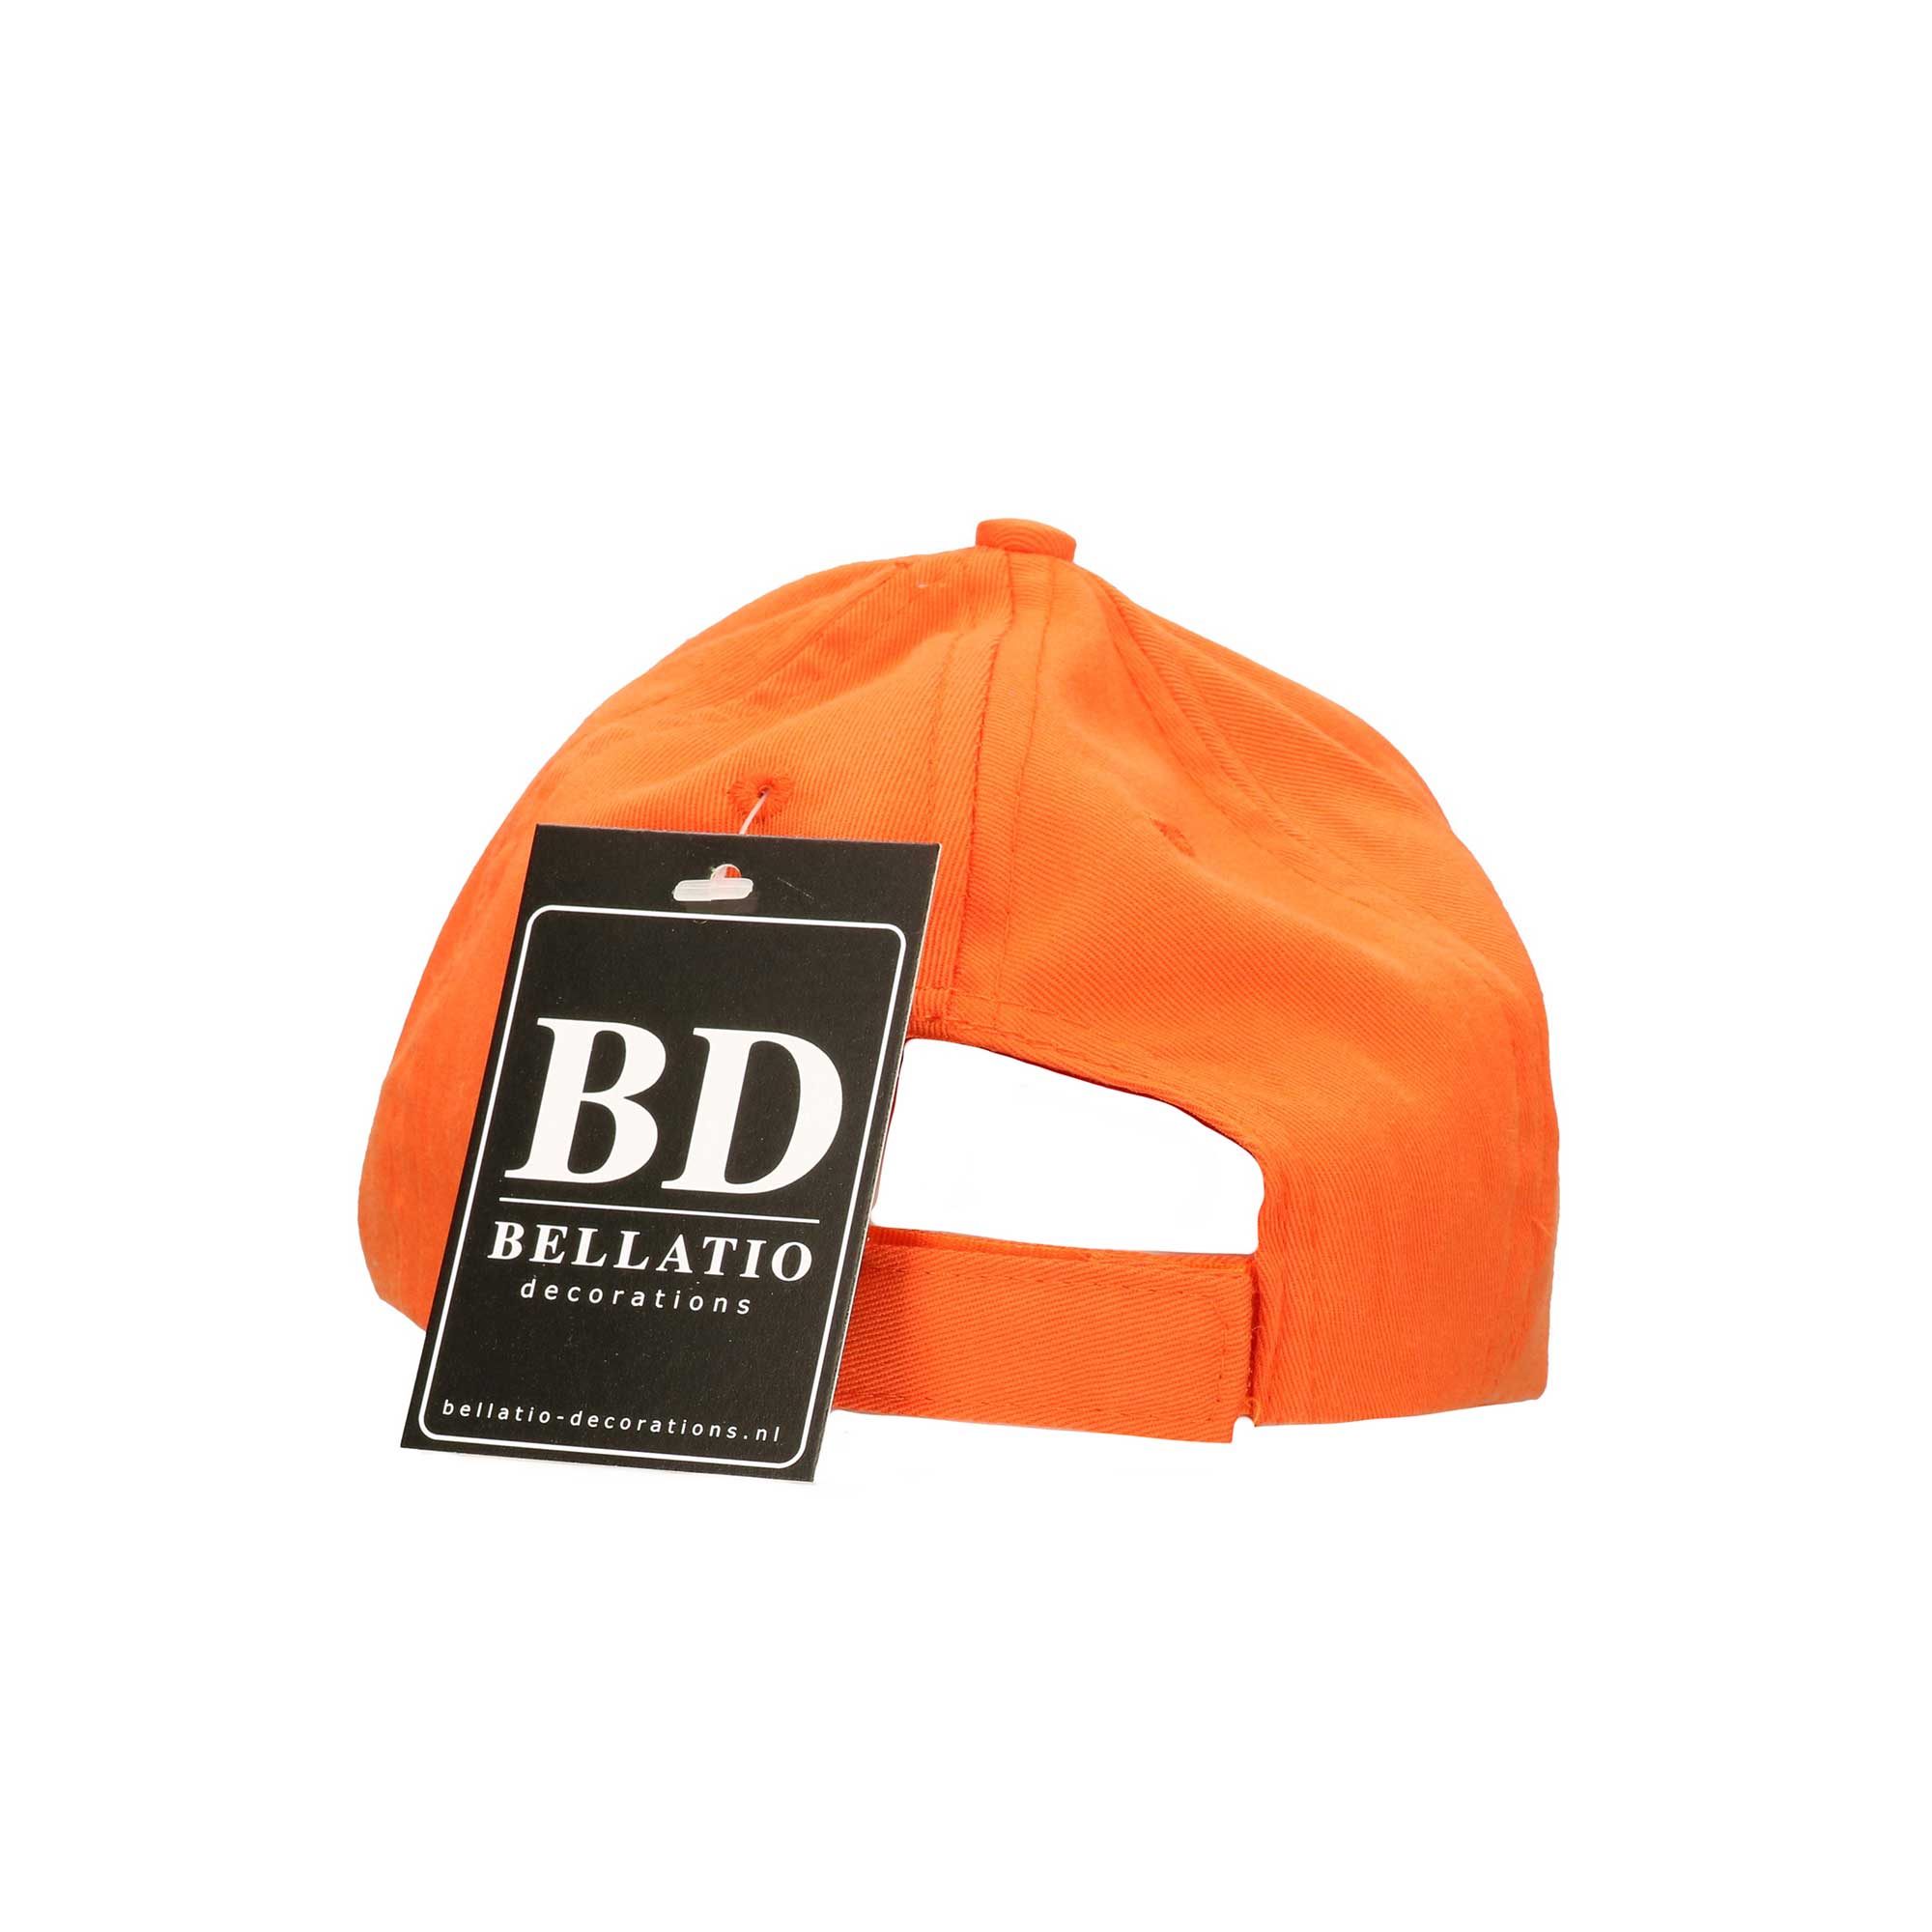 Crew cap orange with white letters for kids